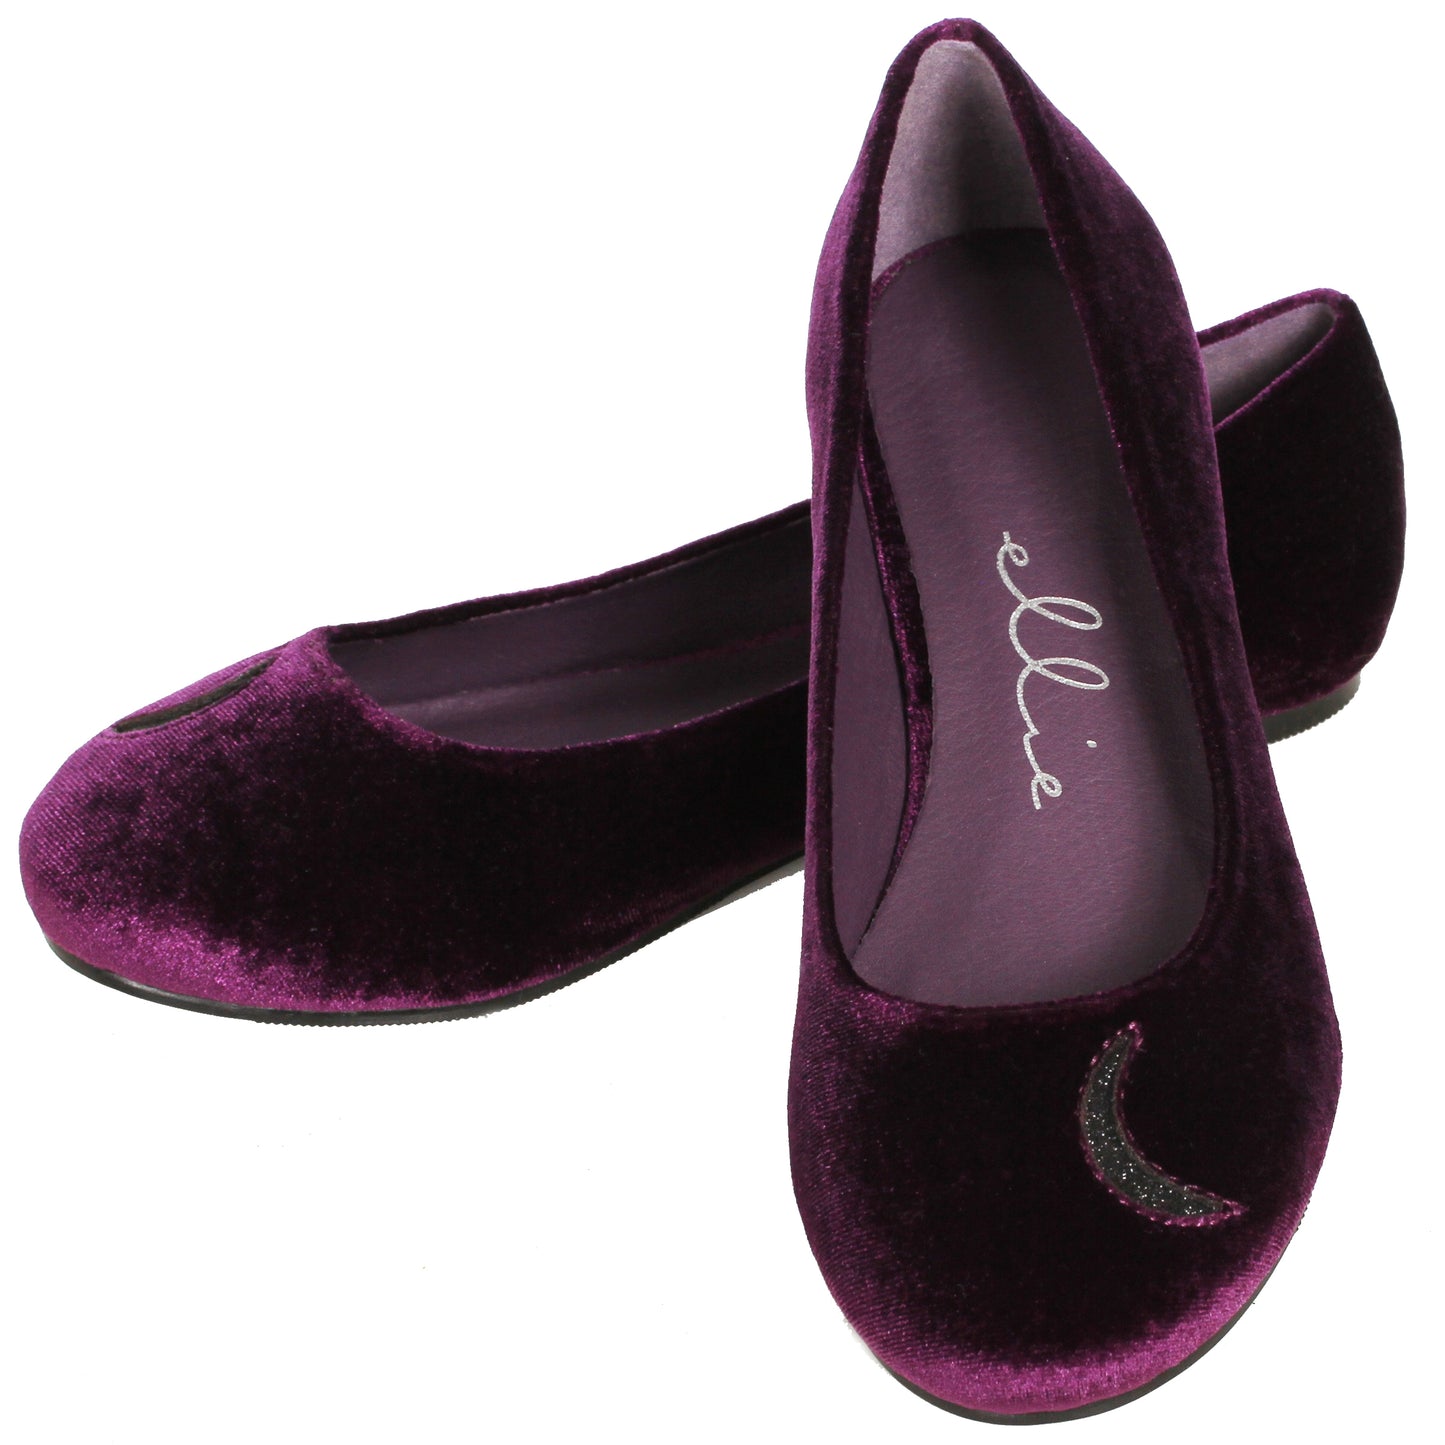 016-SPELL Ellie Shoes Women’s Moon Witch Flat 